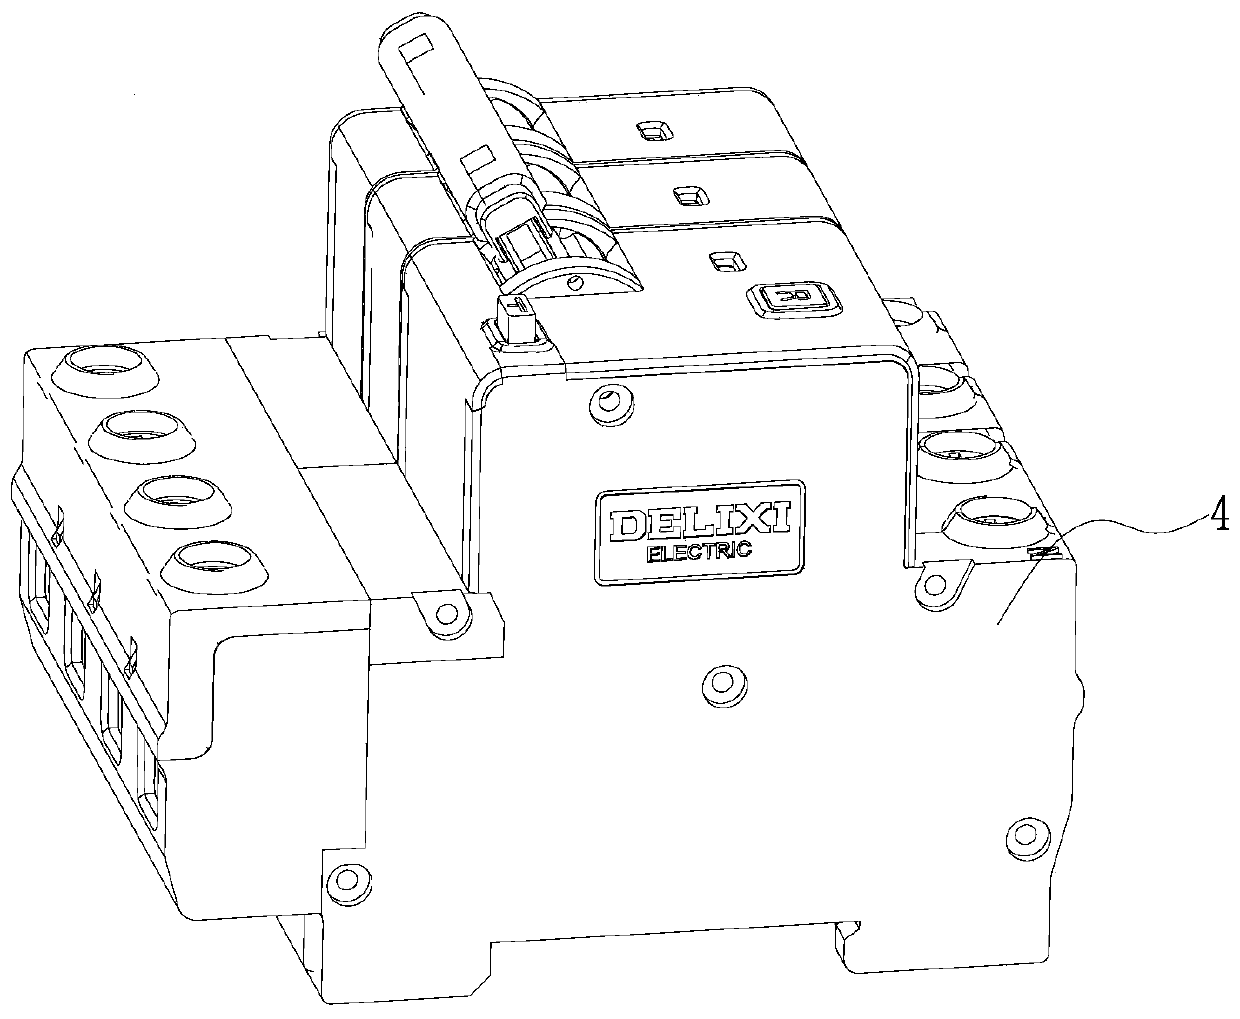 Neutral pole mechanism and residual current circuit breaker